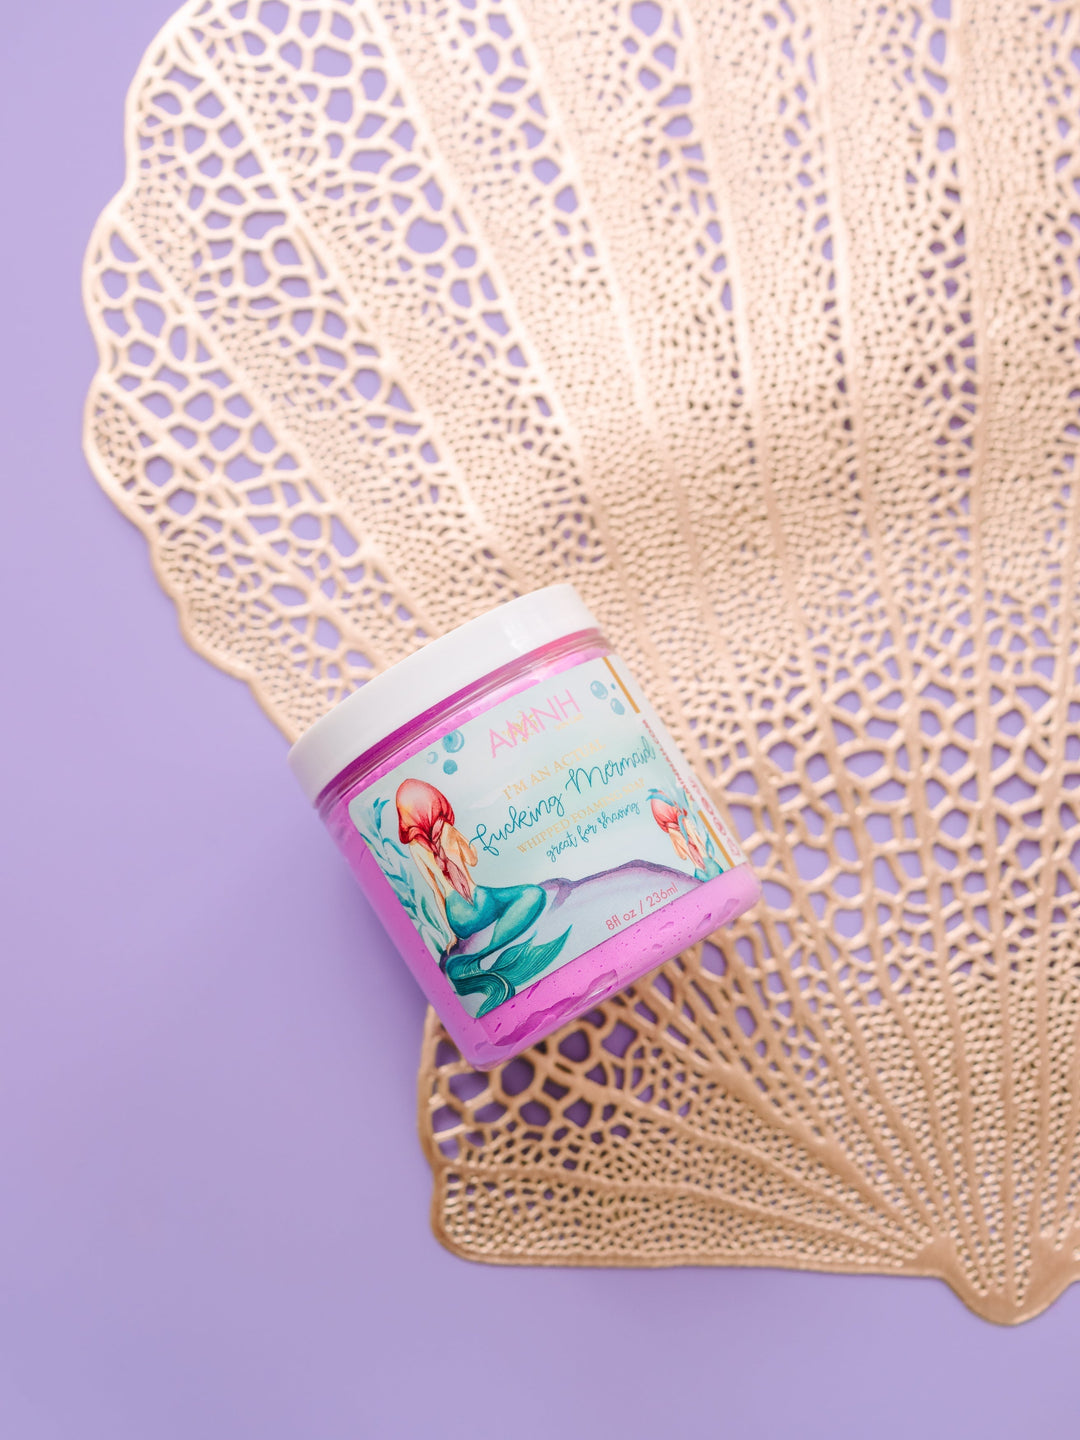 "Be A Mermaid" Body Collection | Body Butter| Foaming Soap| Sugar Scrub| Personal Care AMINNAH 